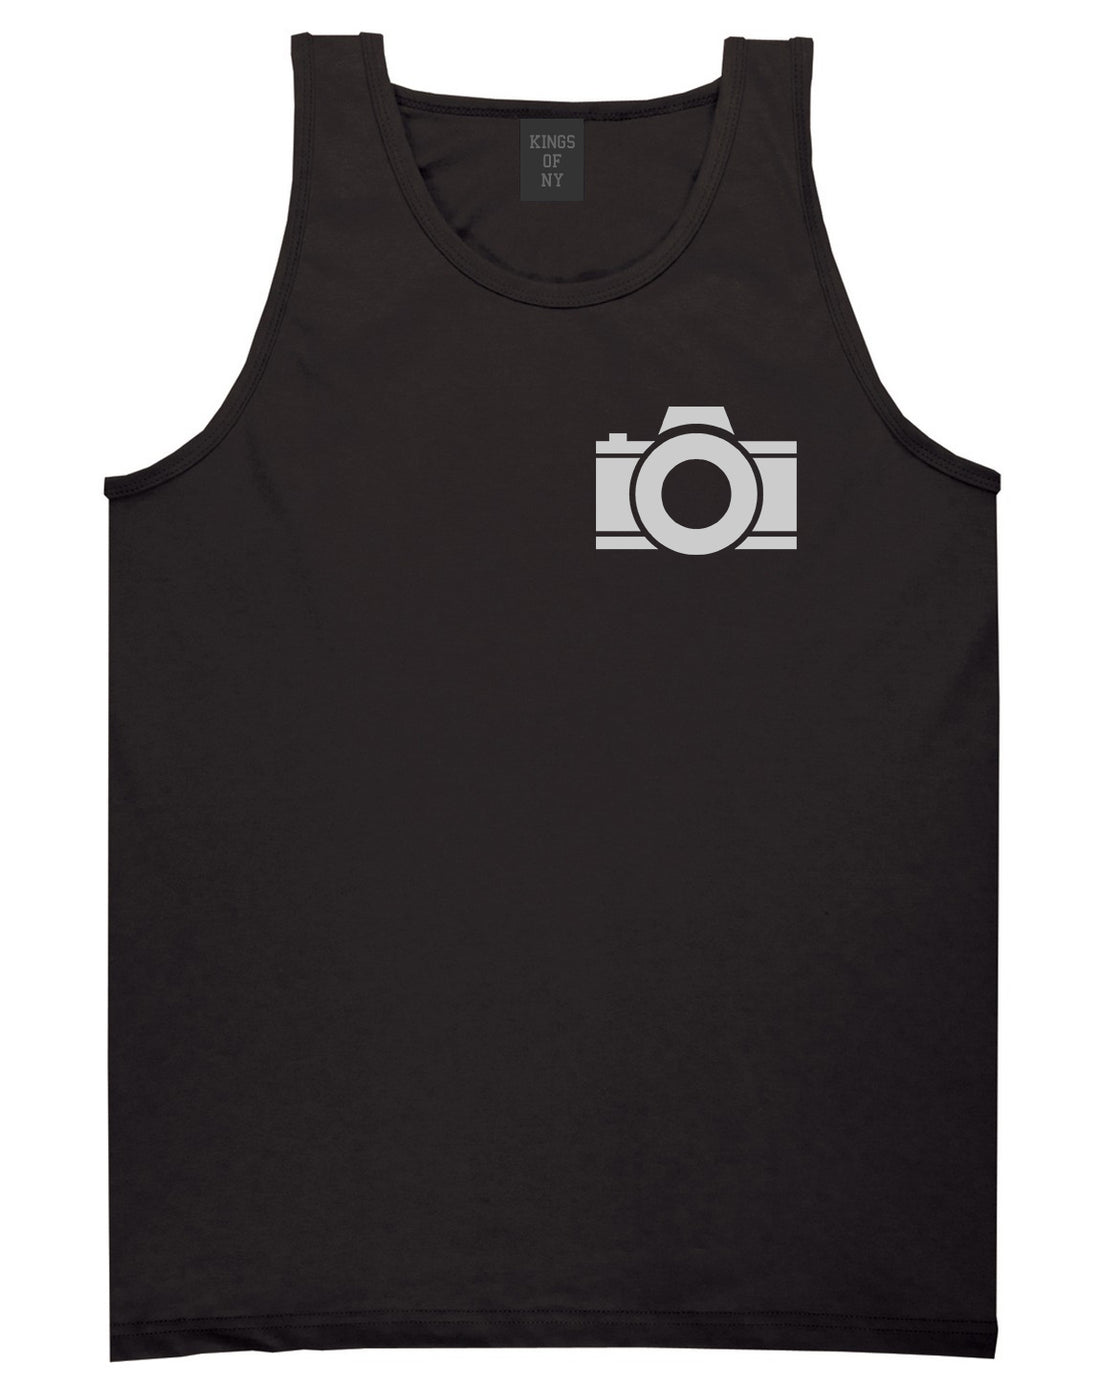 Camera Photographer Chest Black Tank Top Shirt by Kings Of NY